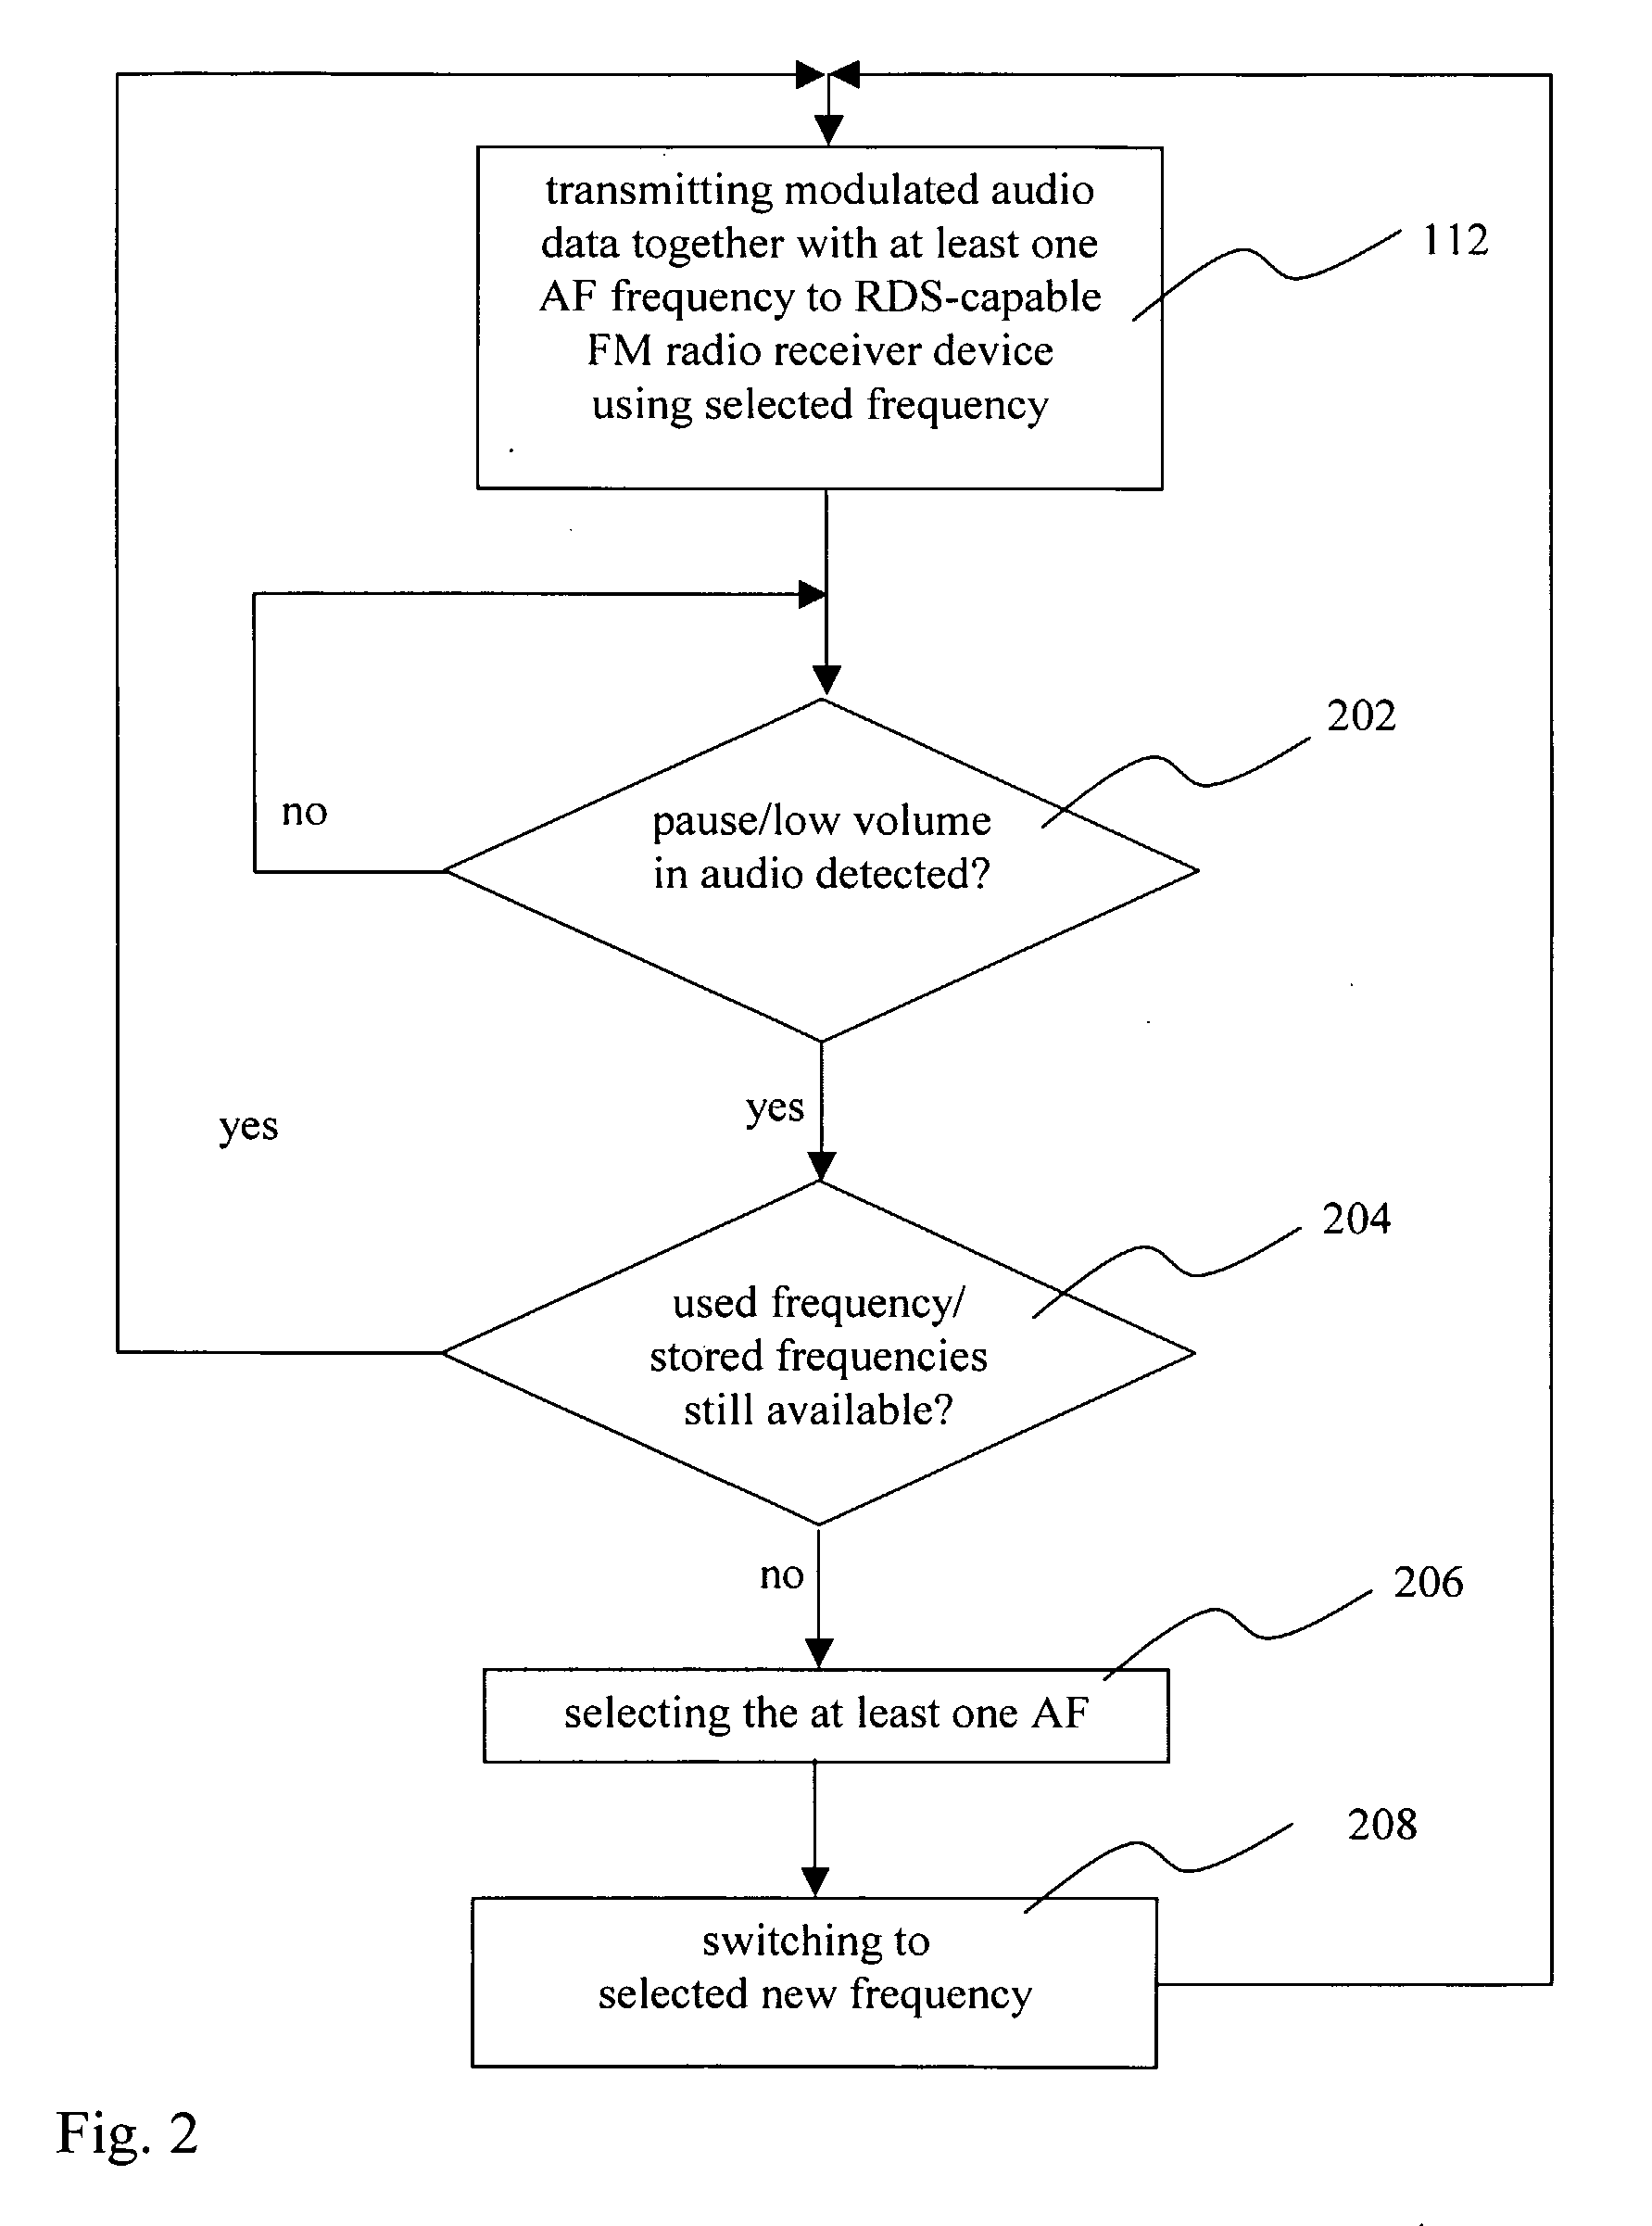 Method and Device for Low-Power FM Transmission of Audio Data to RDS Capable FM Radio Receiver